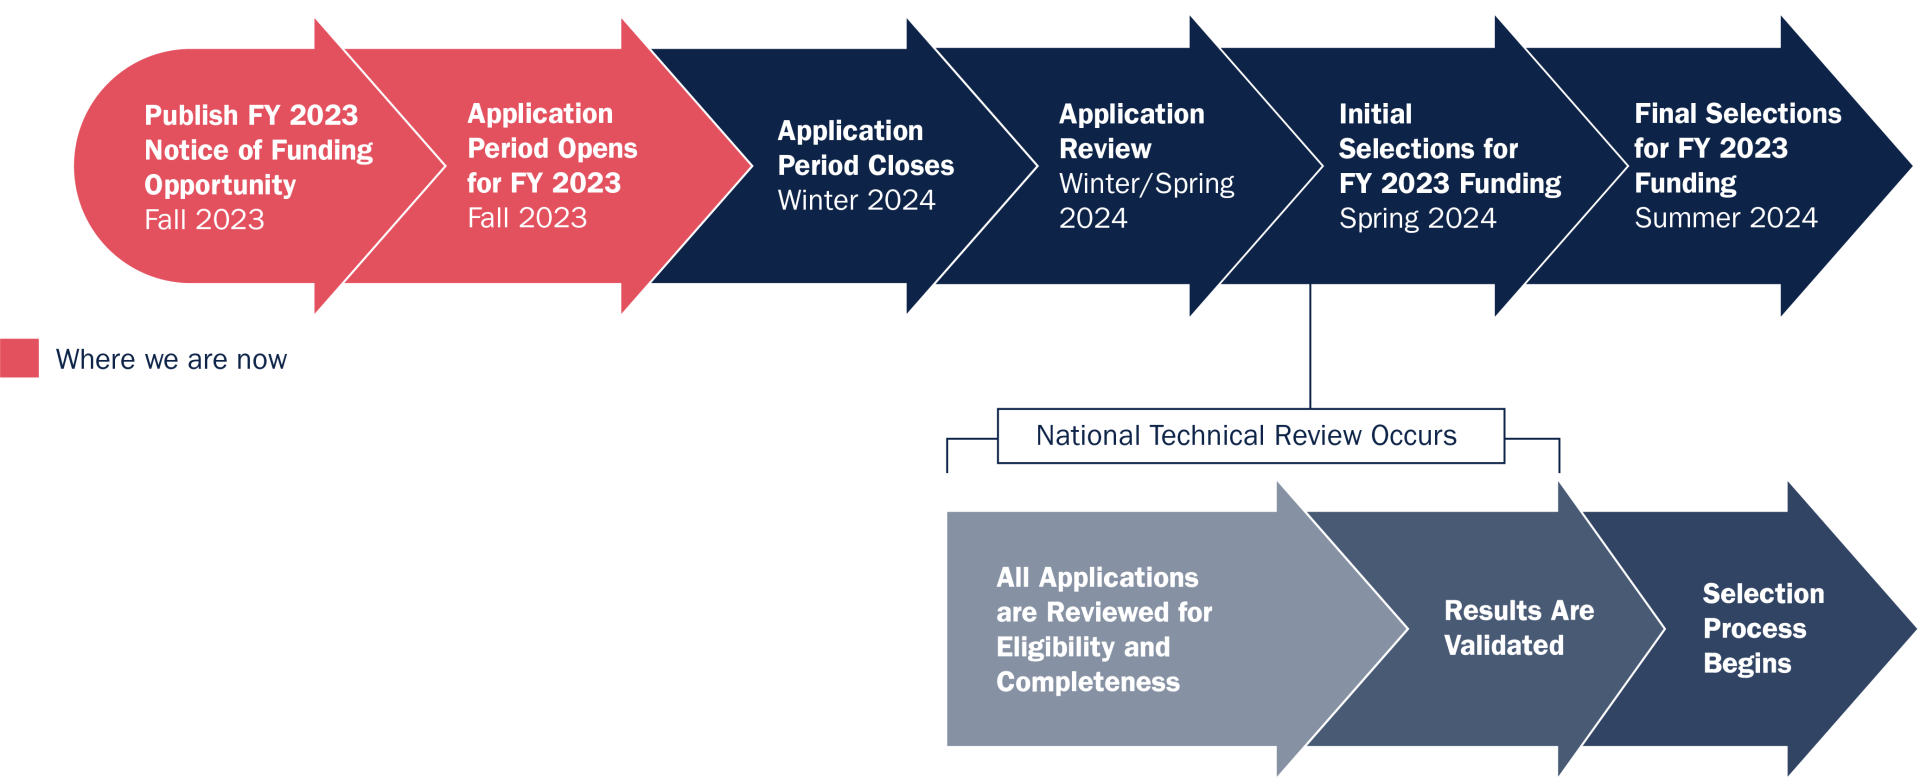 This graphic illustrates the process and timing of the FMA grant program. The fiscal year 2023 (FY 2023) Notice of Funding Opportunity publishes in the fall of 2023. Then the application period opens in fall of 2023. The application period closes in the winter of 2024. The application review occurs in the winter/spring of 2024. All applications are reviewed for eligibility and completeness. These results are then validated, and the selection process begins. The initial selections are announced in the spring